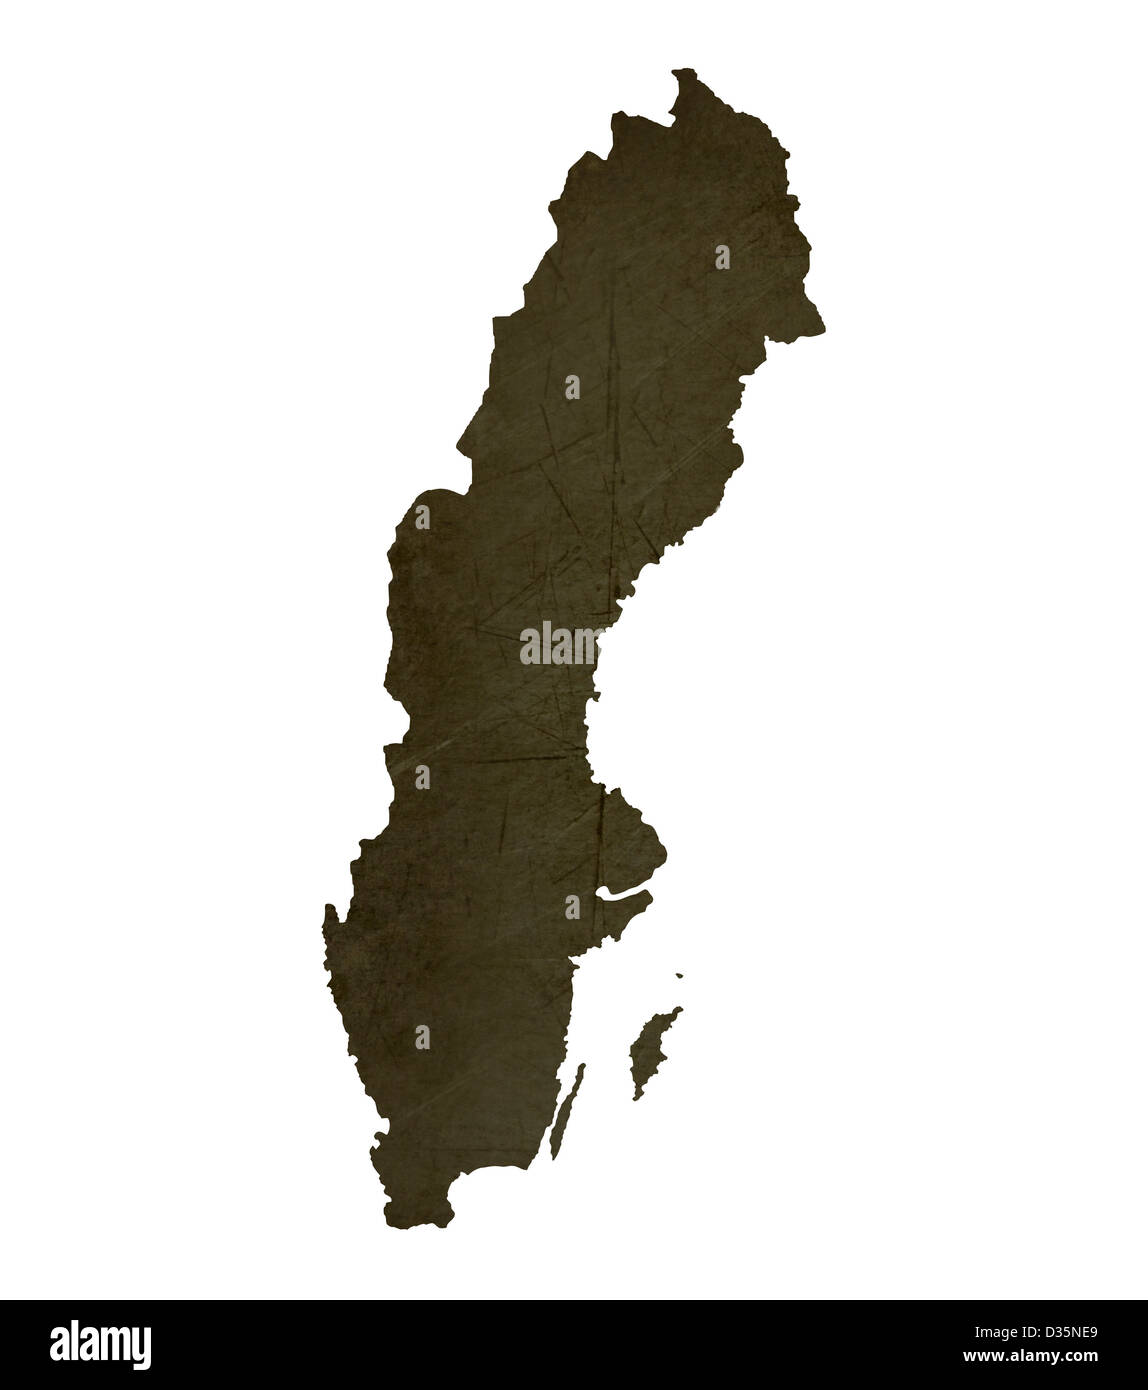 Dark silhouetted and textured map of Sweden isolated on white background. Stock Photo